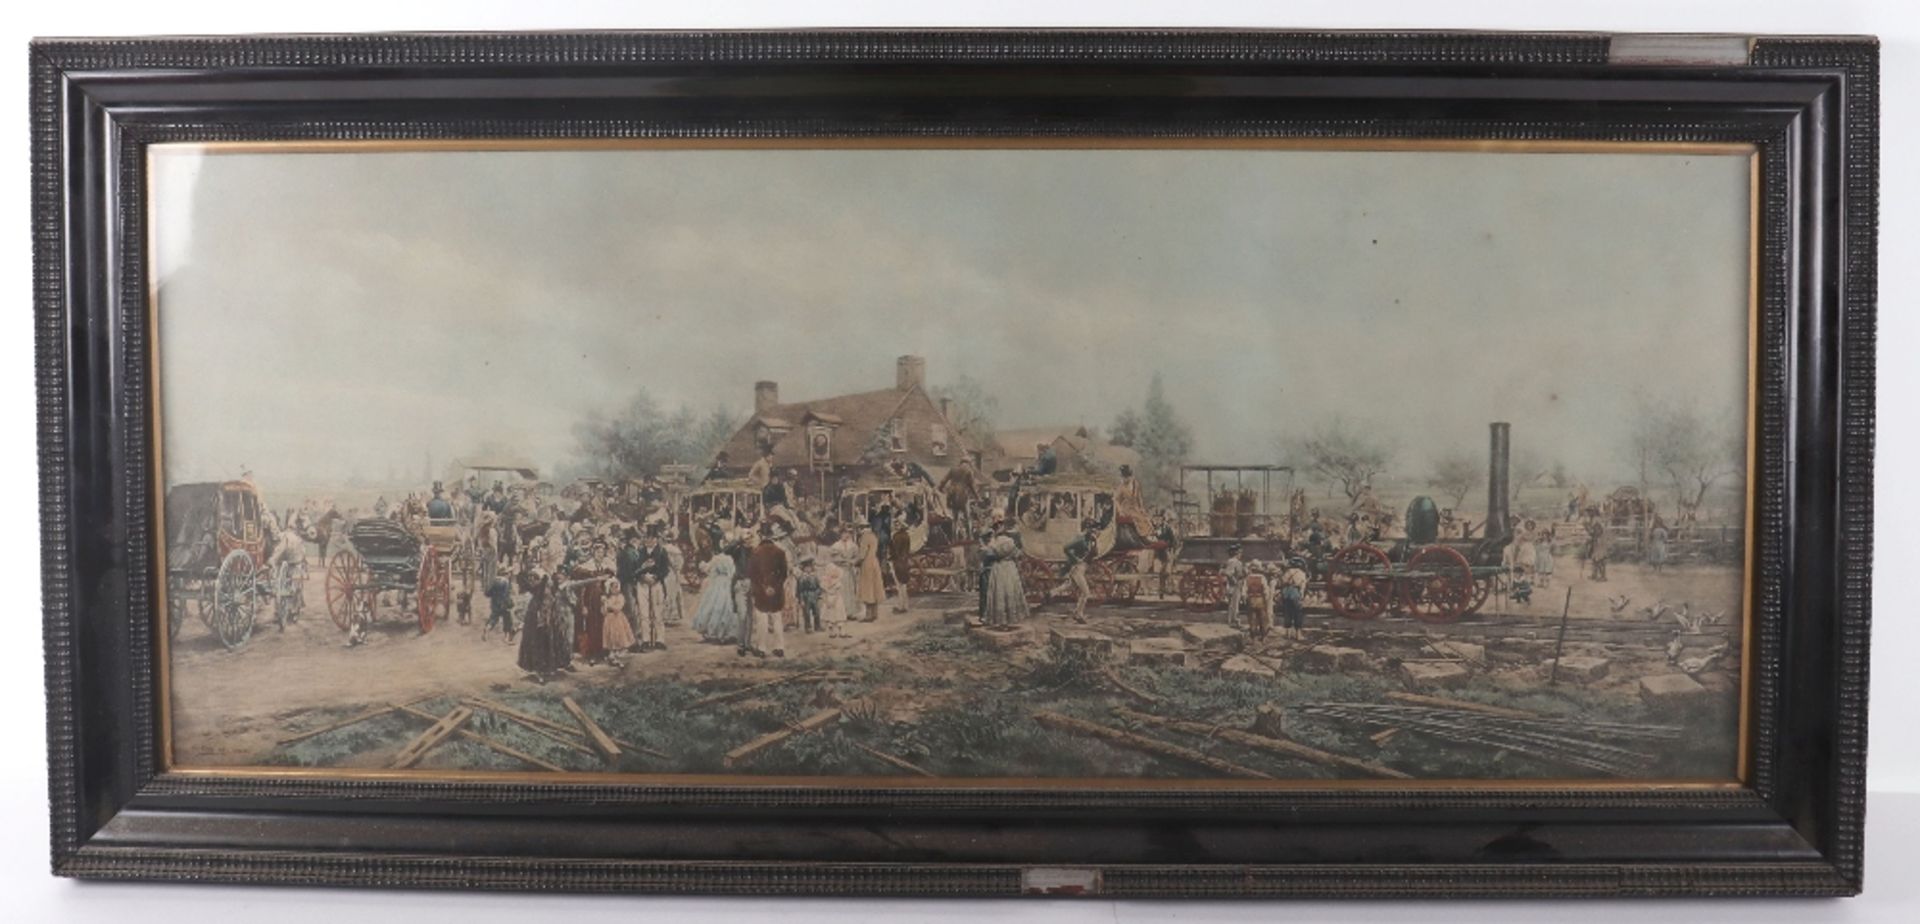 A framed print of an 18th century scene of steam locomotive and carriages in rural scene - Image 2 of 5